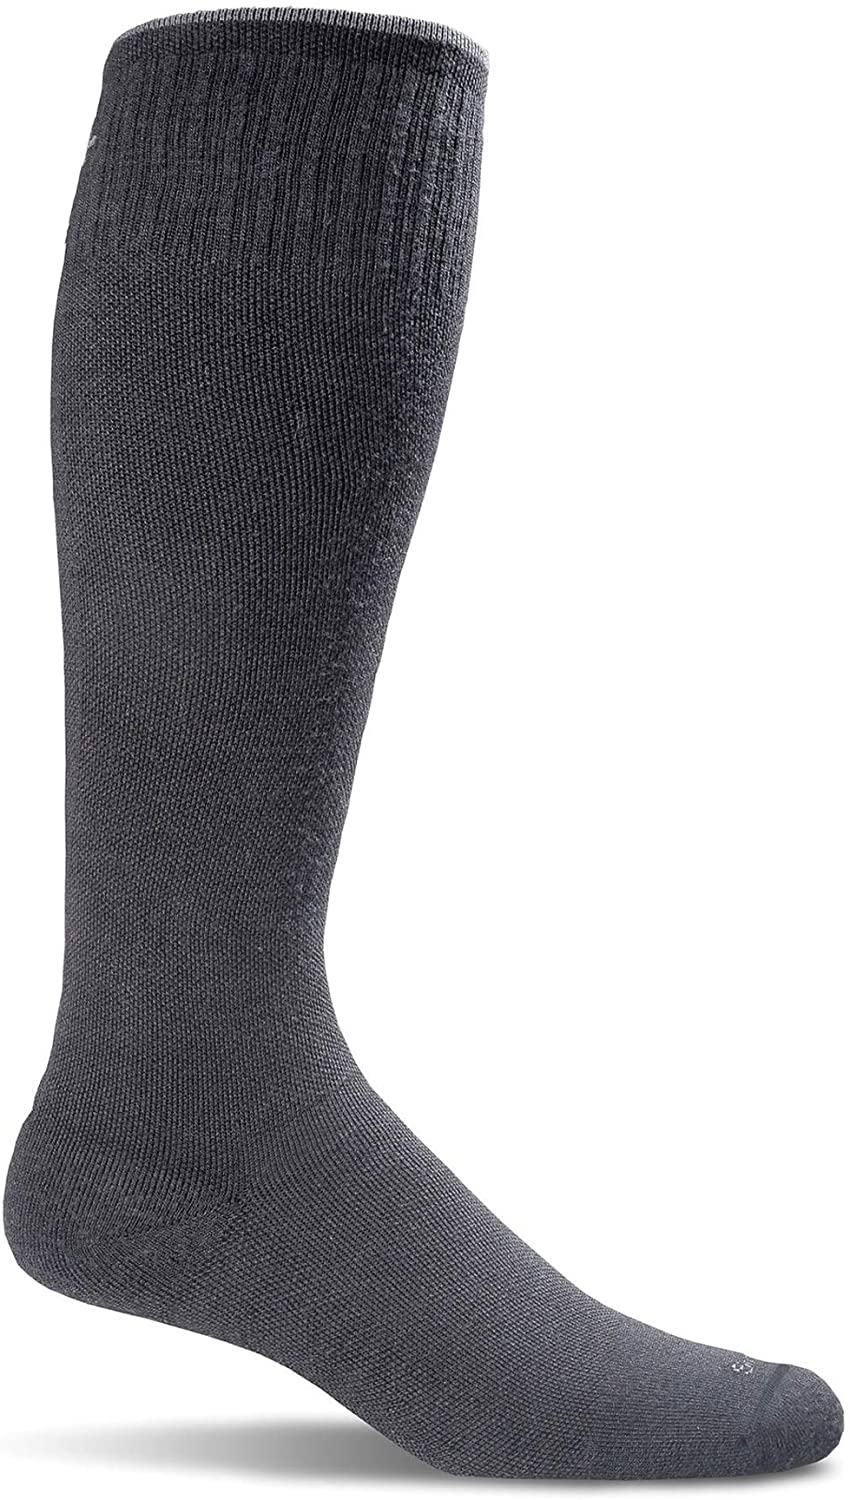 Sockwell Women's Circulator Moderate Graduated Compression Sock in Black from the side